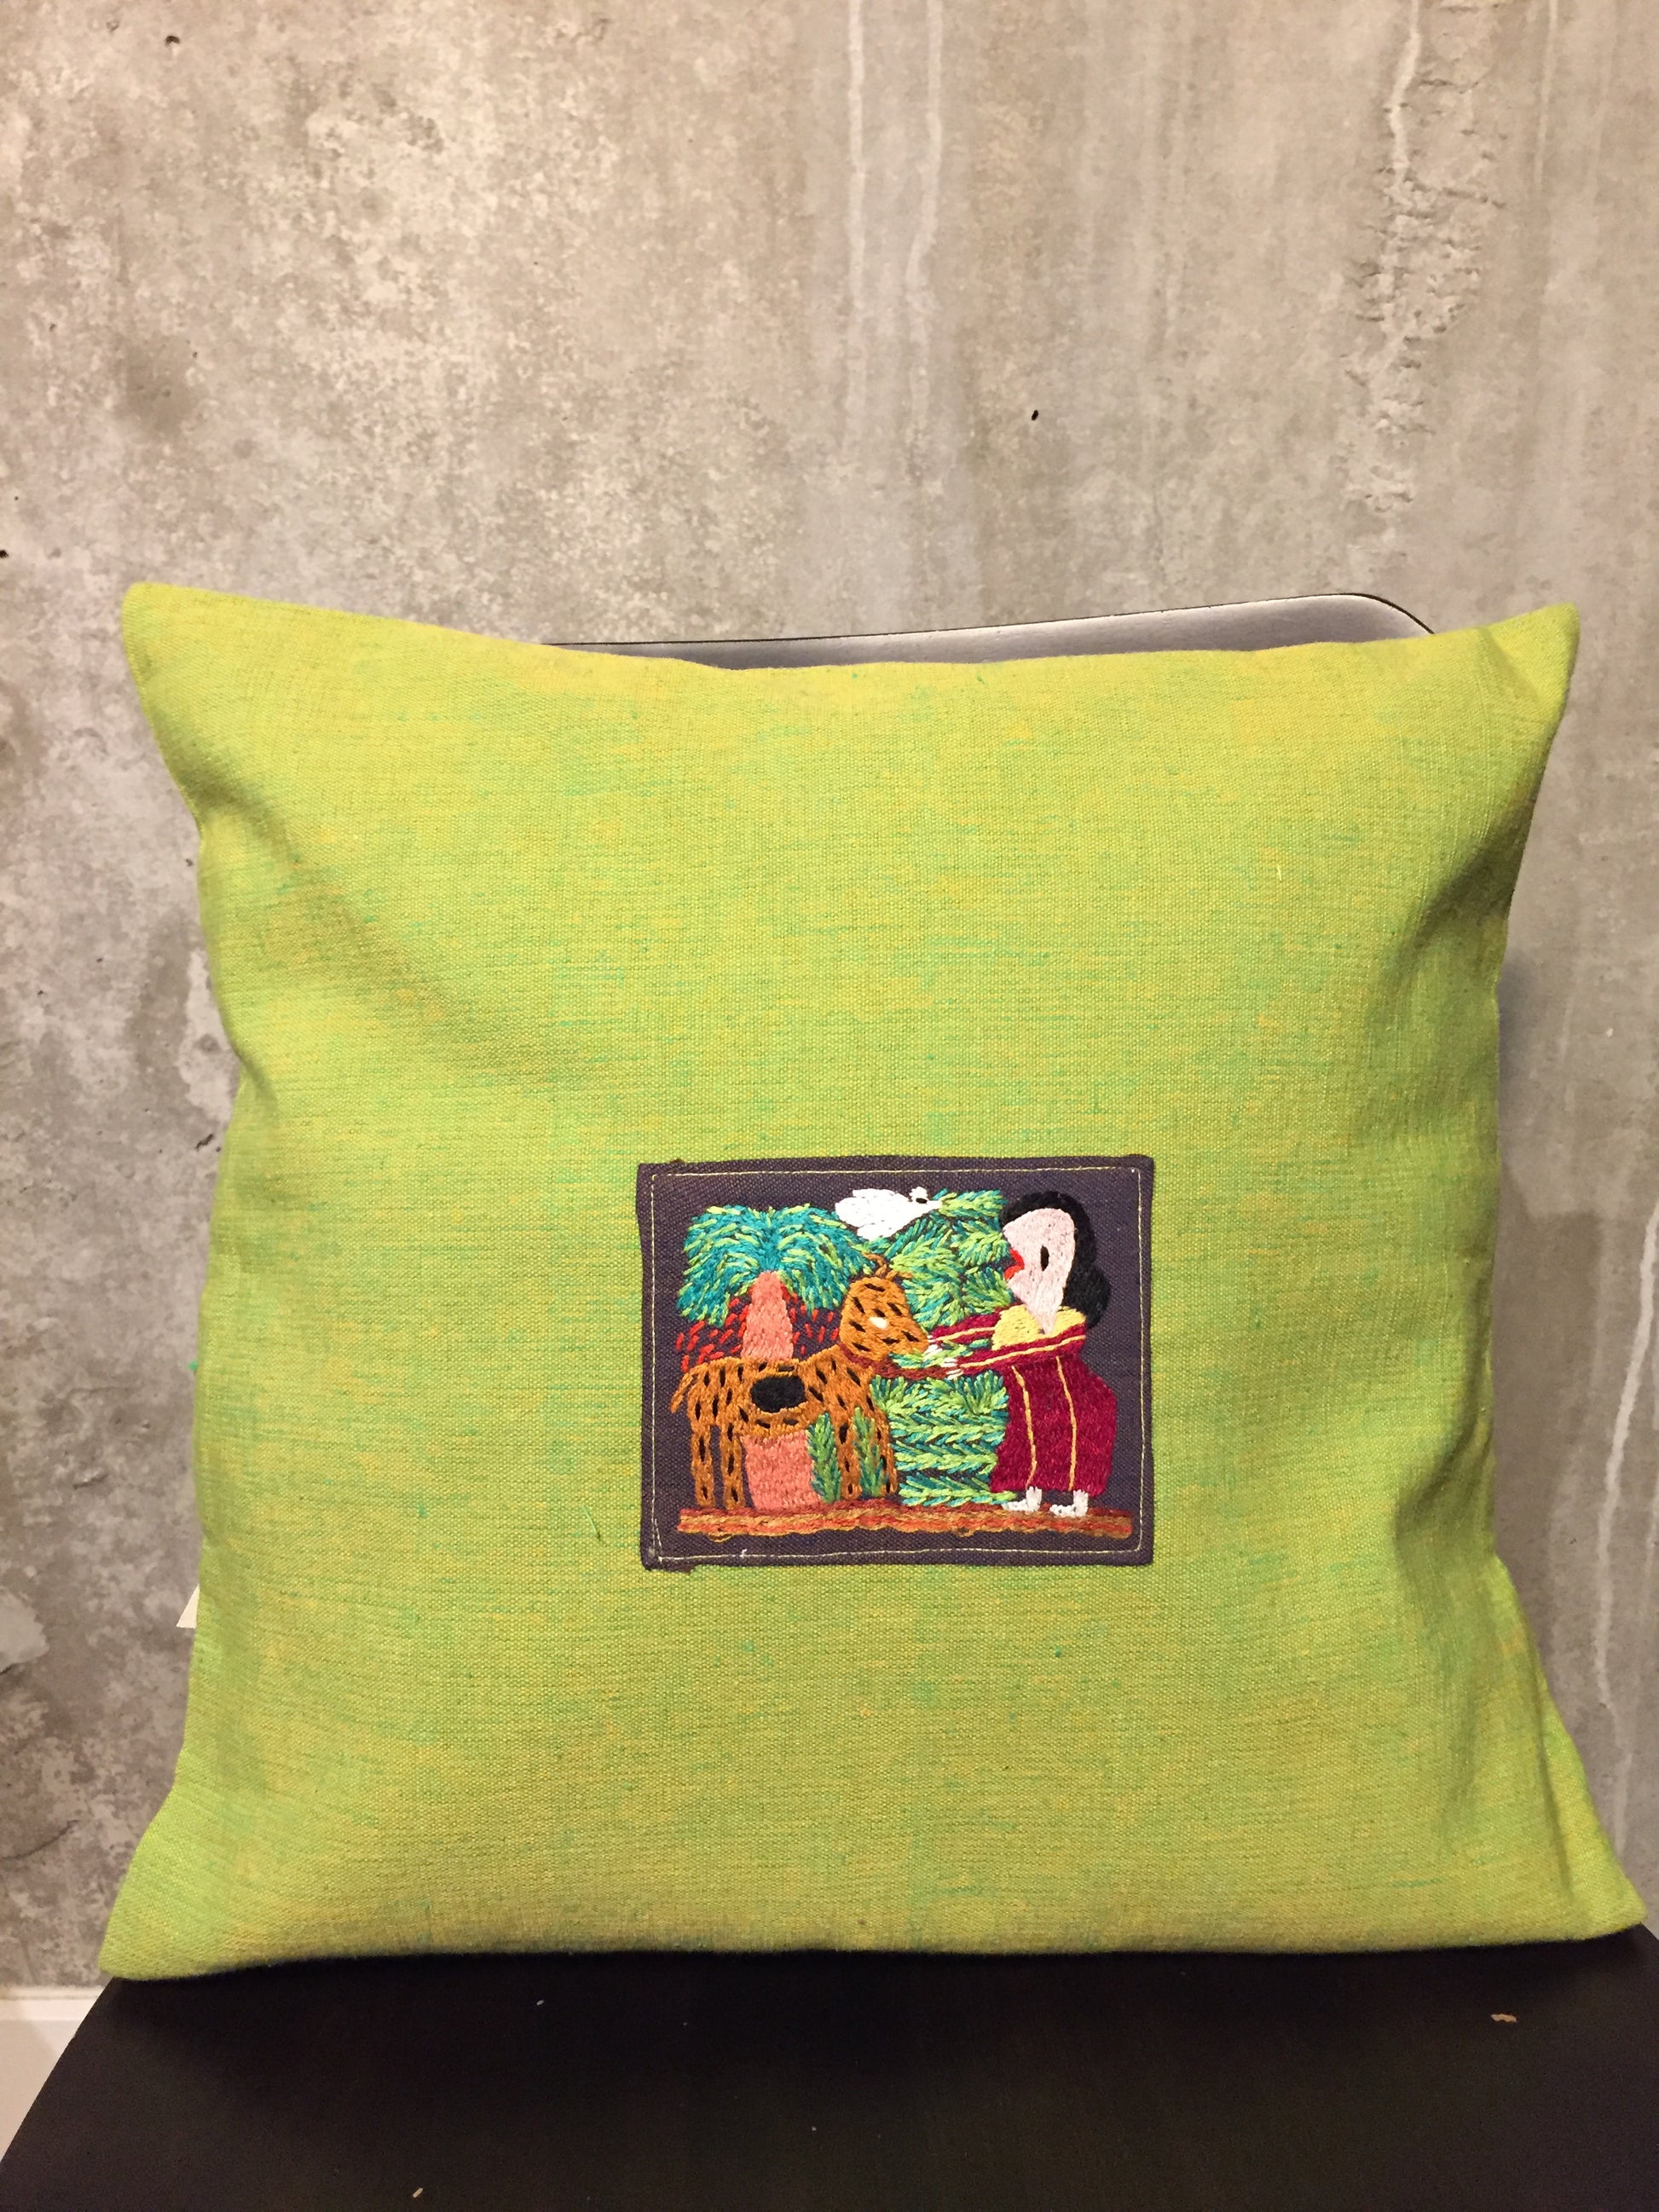 Handwoven Egyptian Cotton Cushion Cover - Embroidered Fellaha with Goat - Dandarah